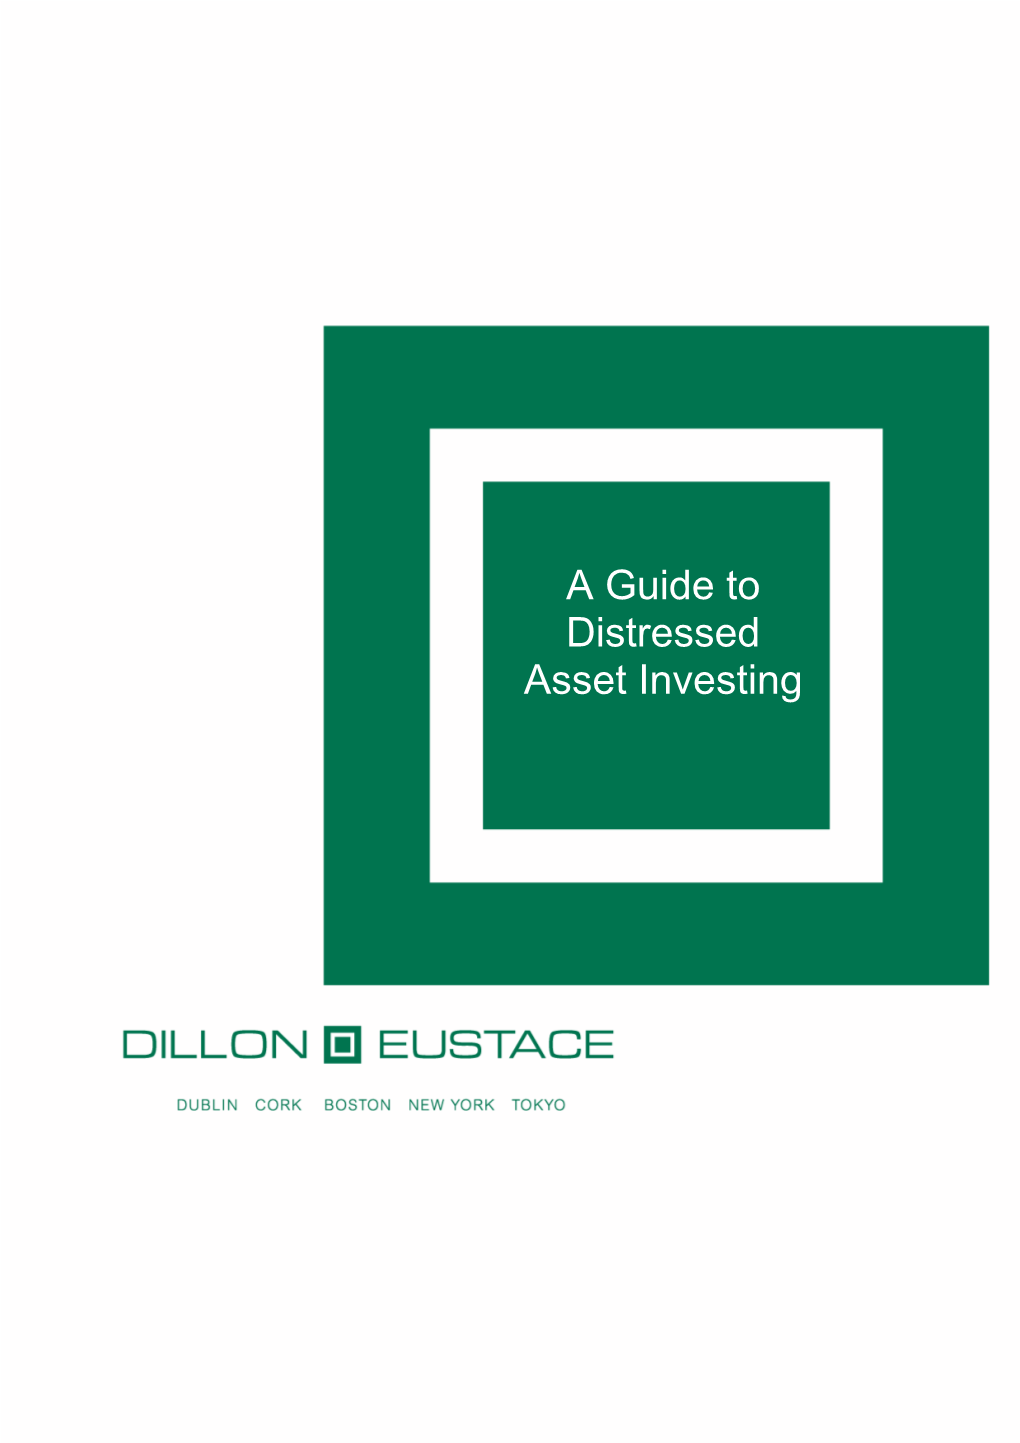 A Guide to Distressed Asset Investing